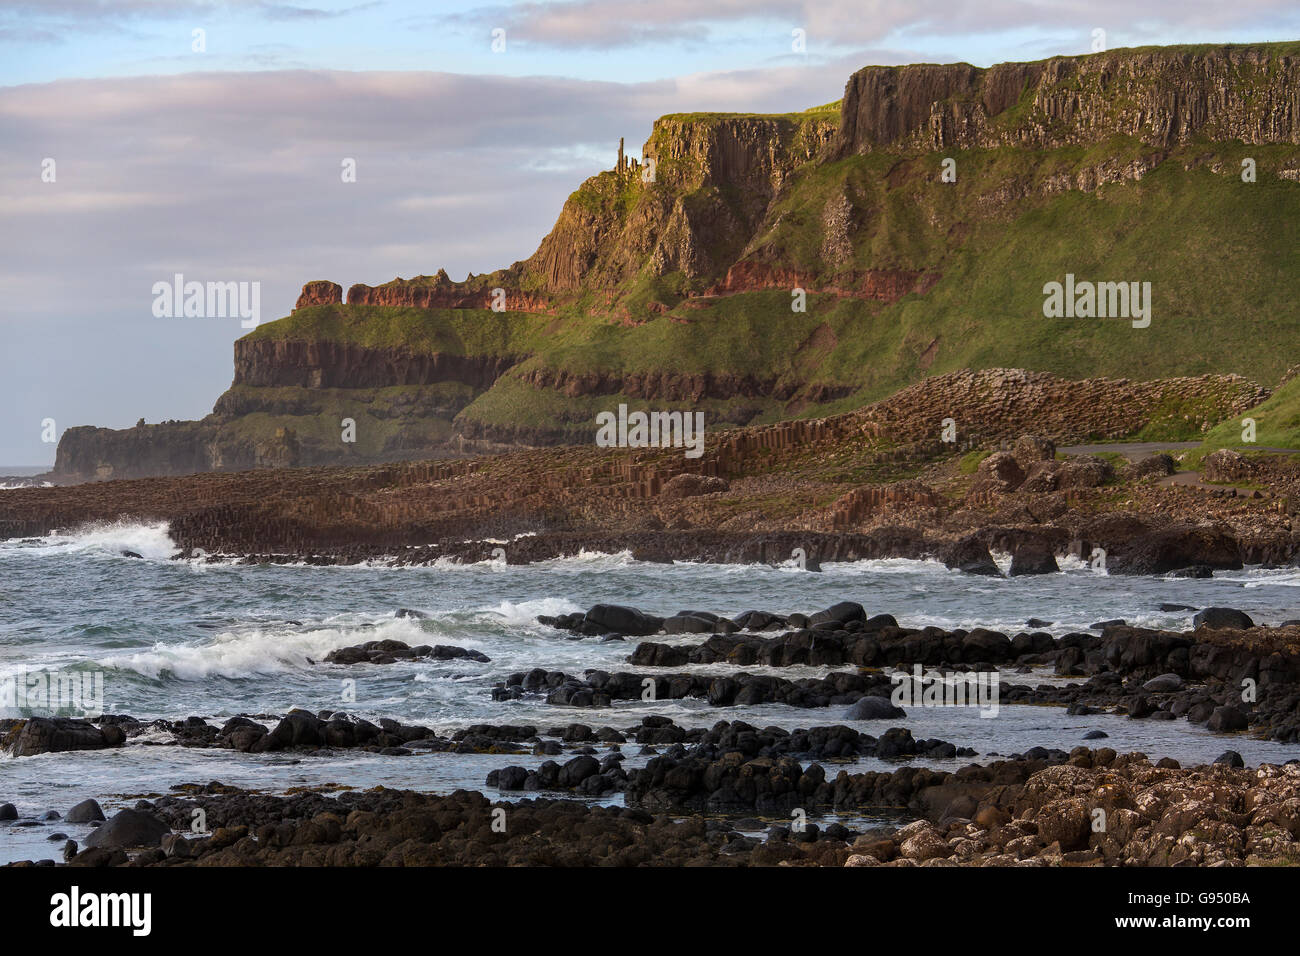 The Giants Causeway in County Antrim in Northern Ireland. A UNESCO World Heritage Site. Stock Photo